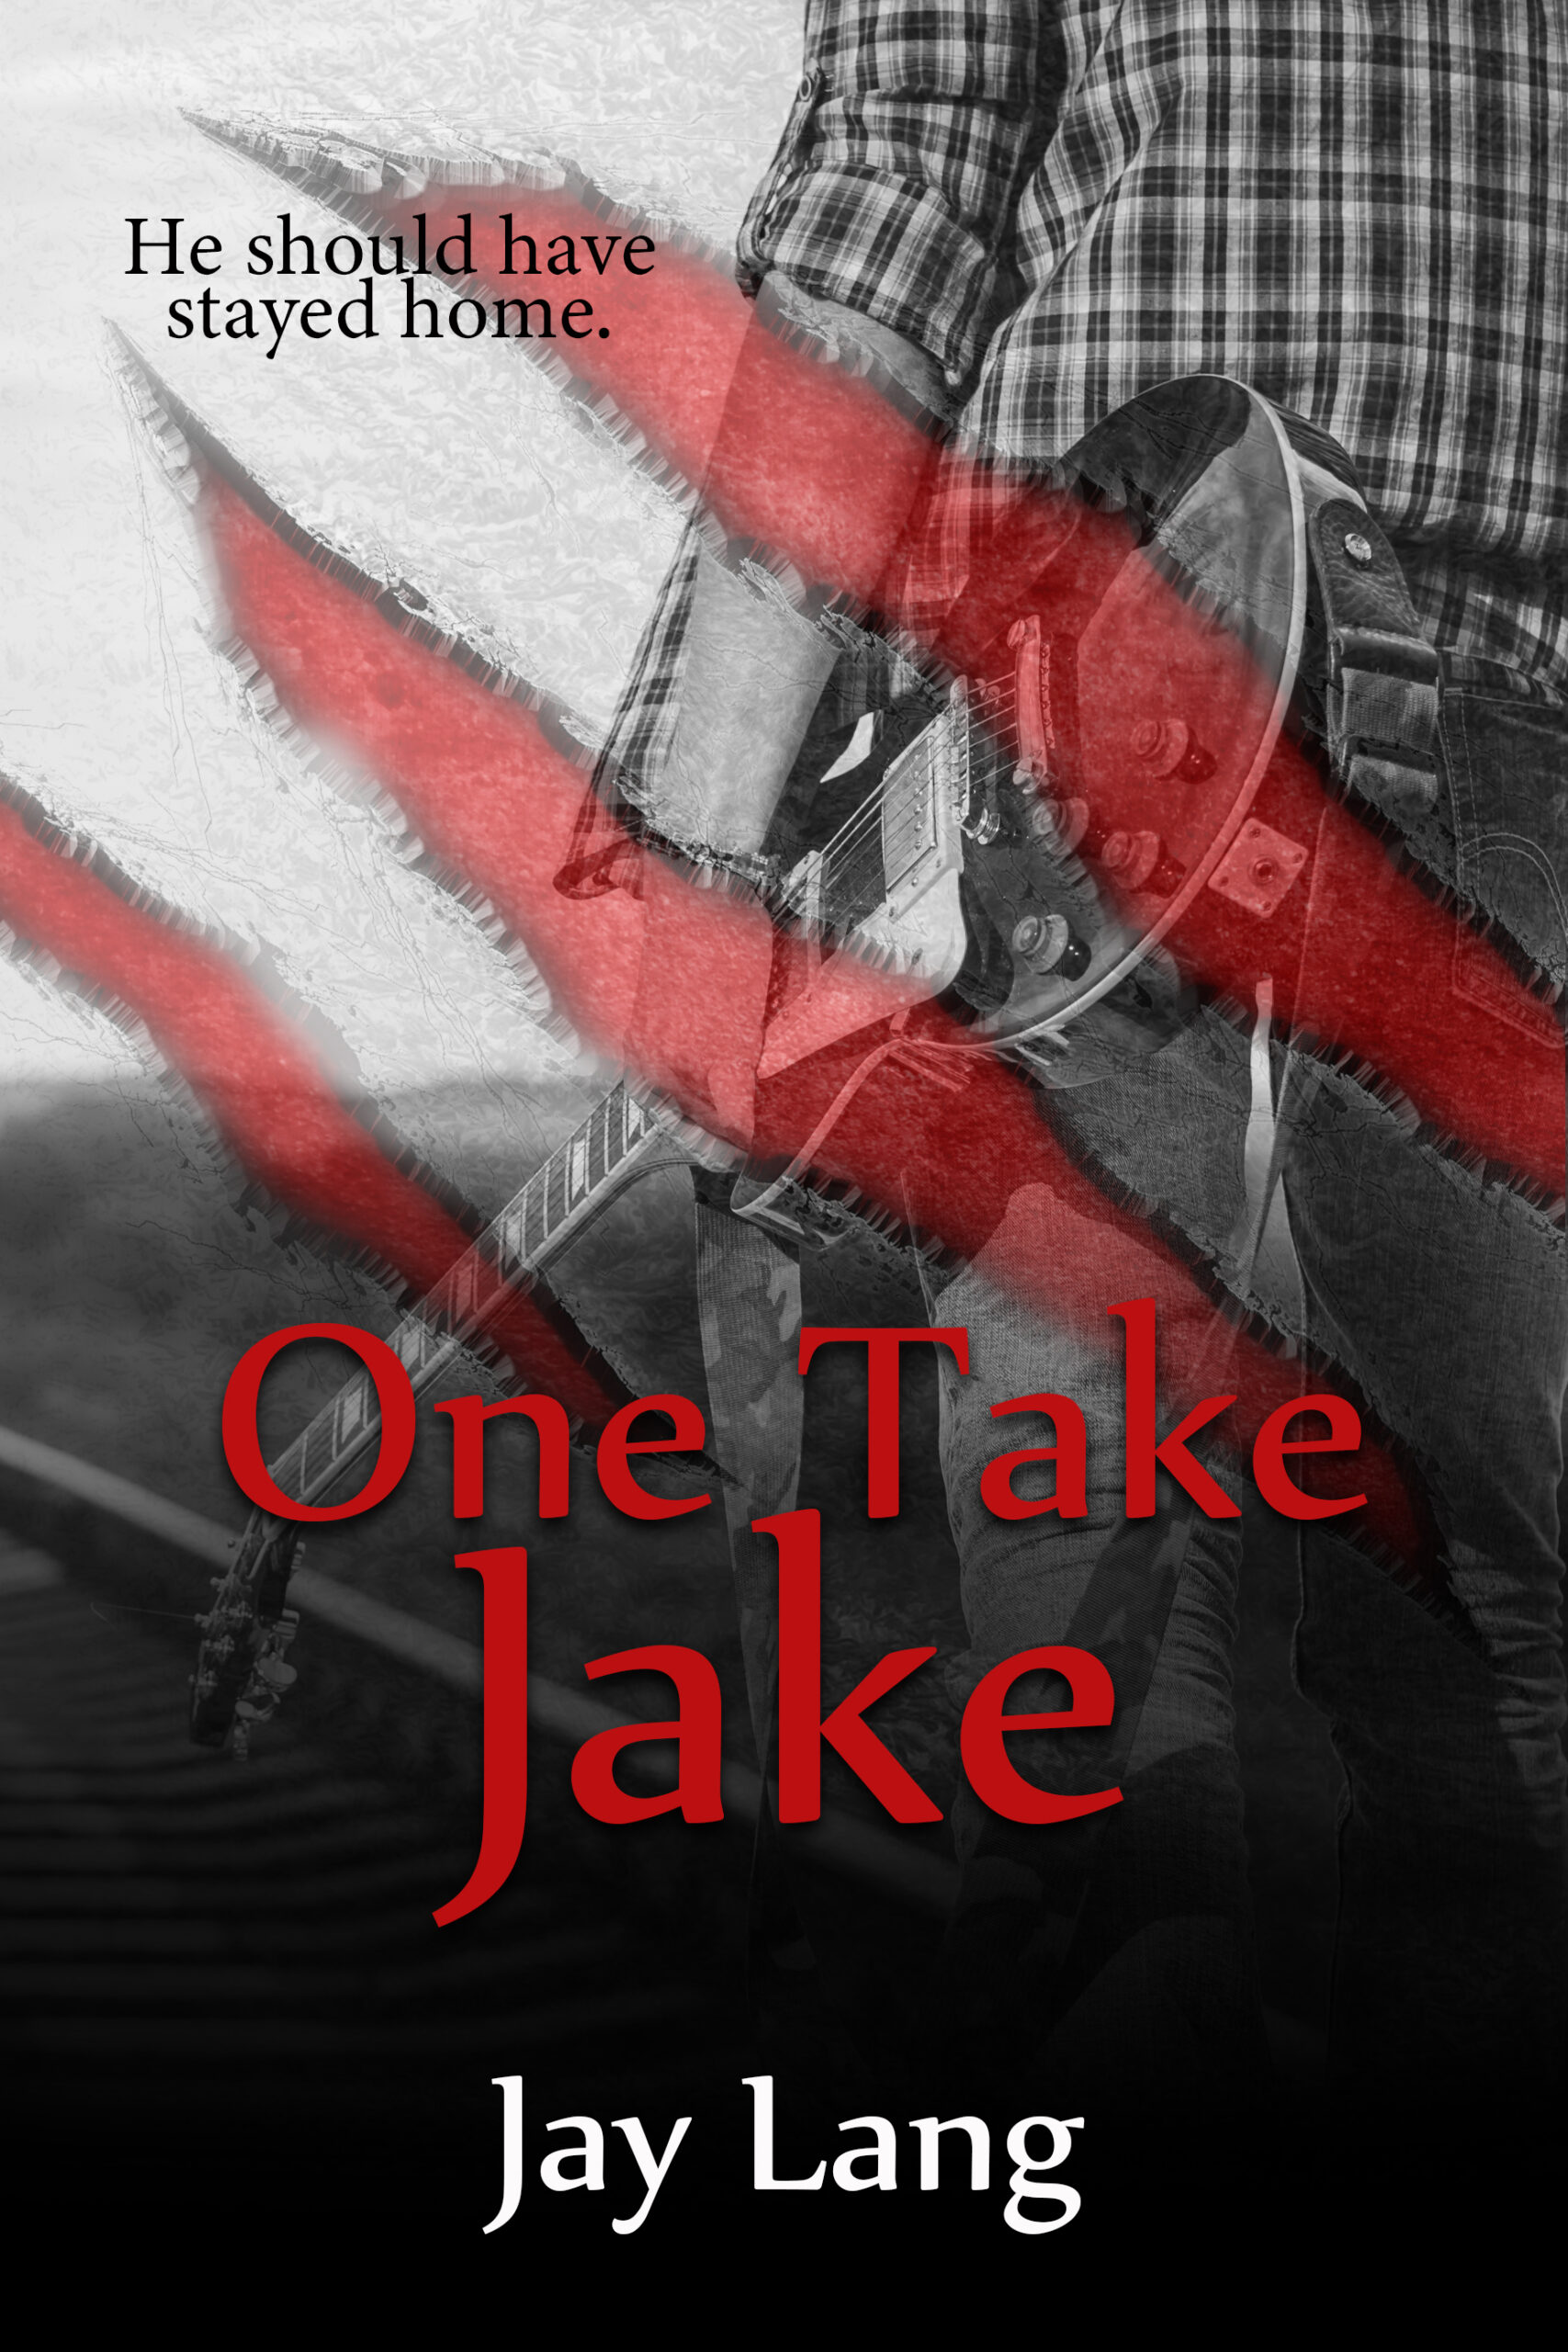 Jay Lang “One Take Jake” book cover, image by Michelle Lee